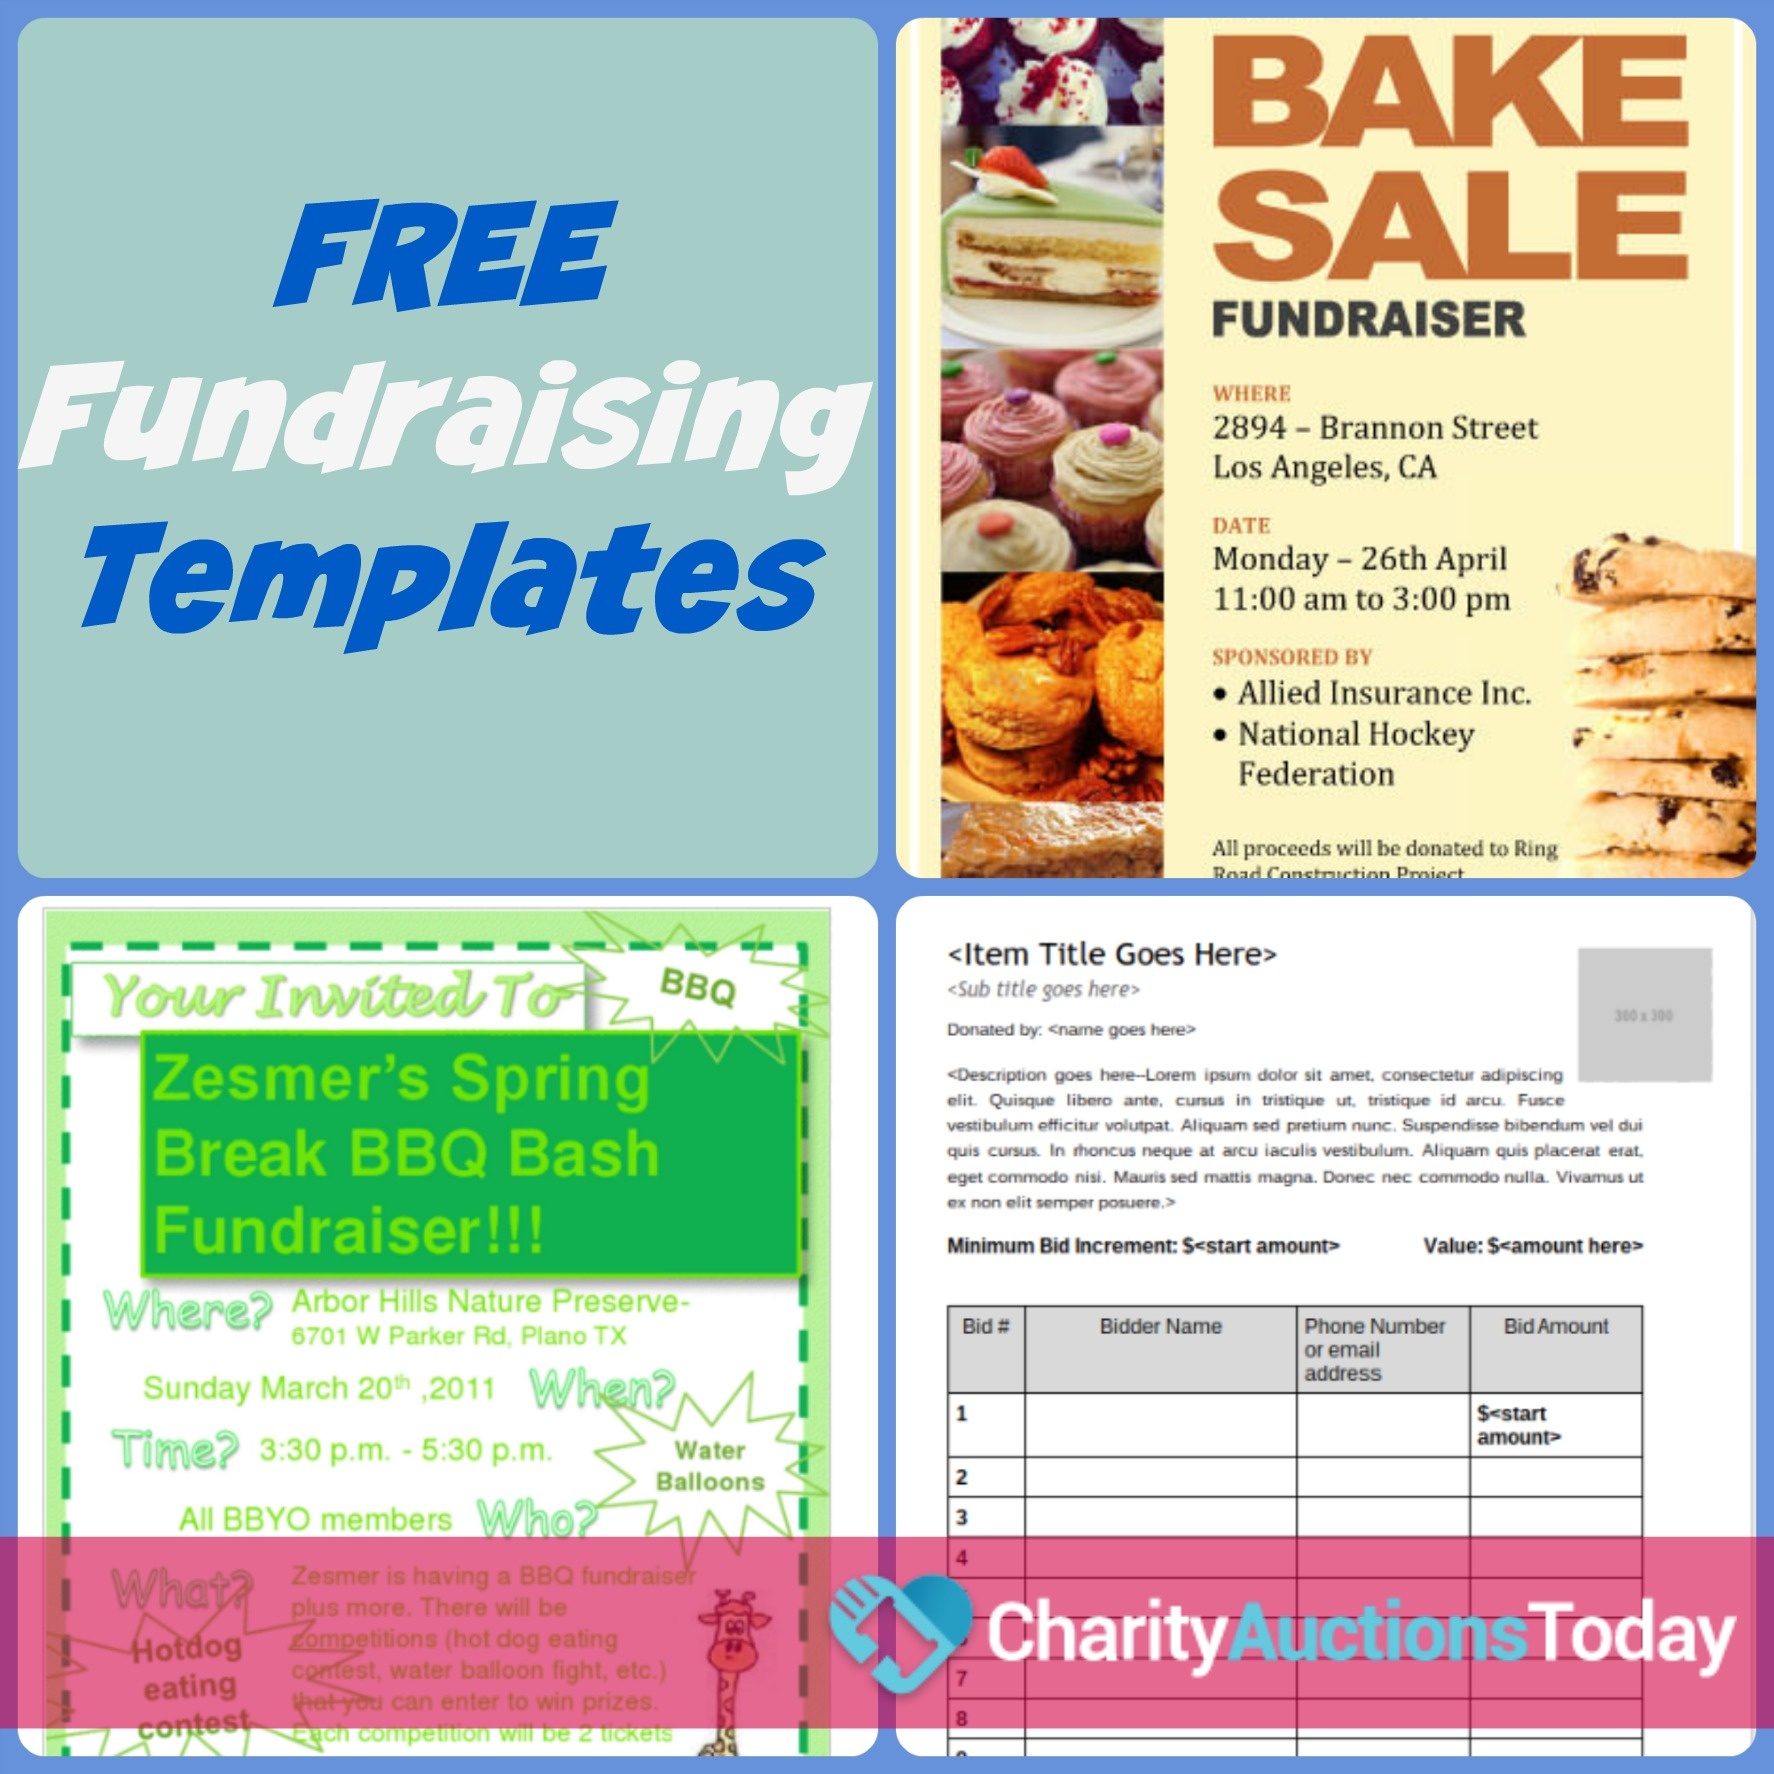 Free Fundraiser Flyer | Charity Auctions Today - Create Your Own Free Printable Flyers